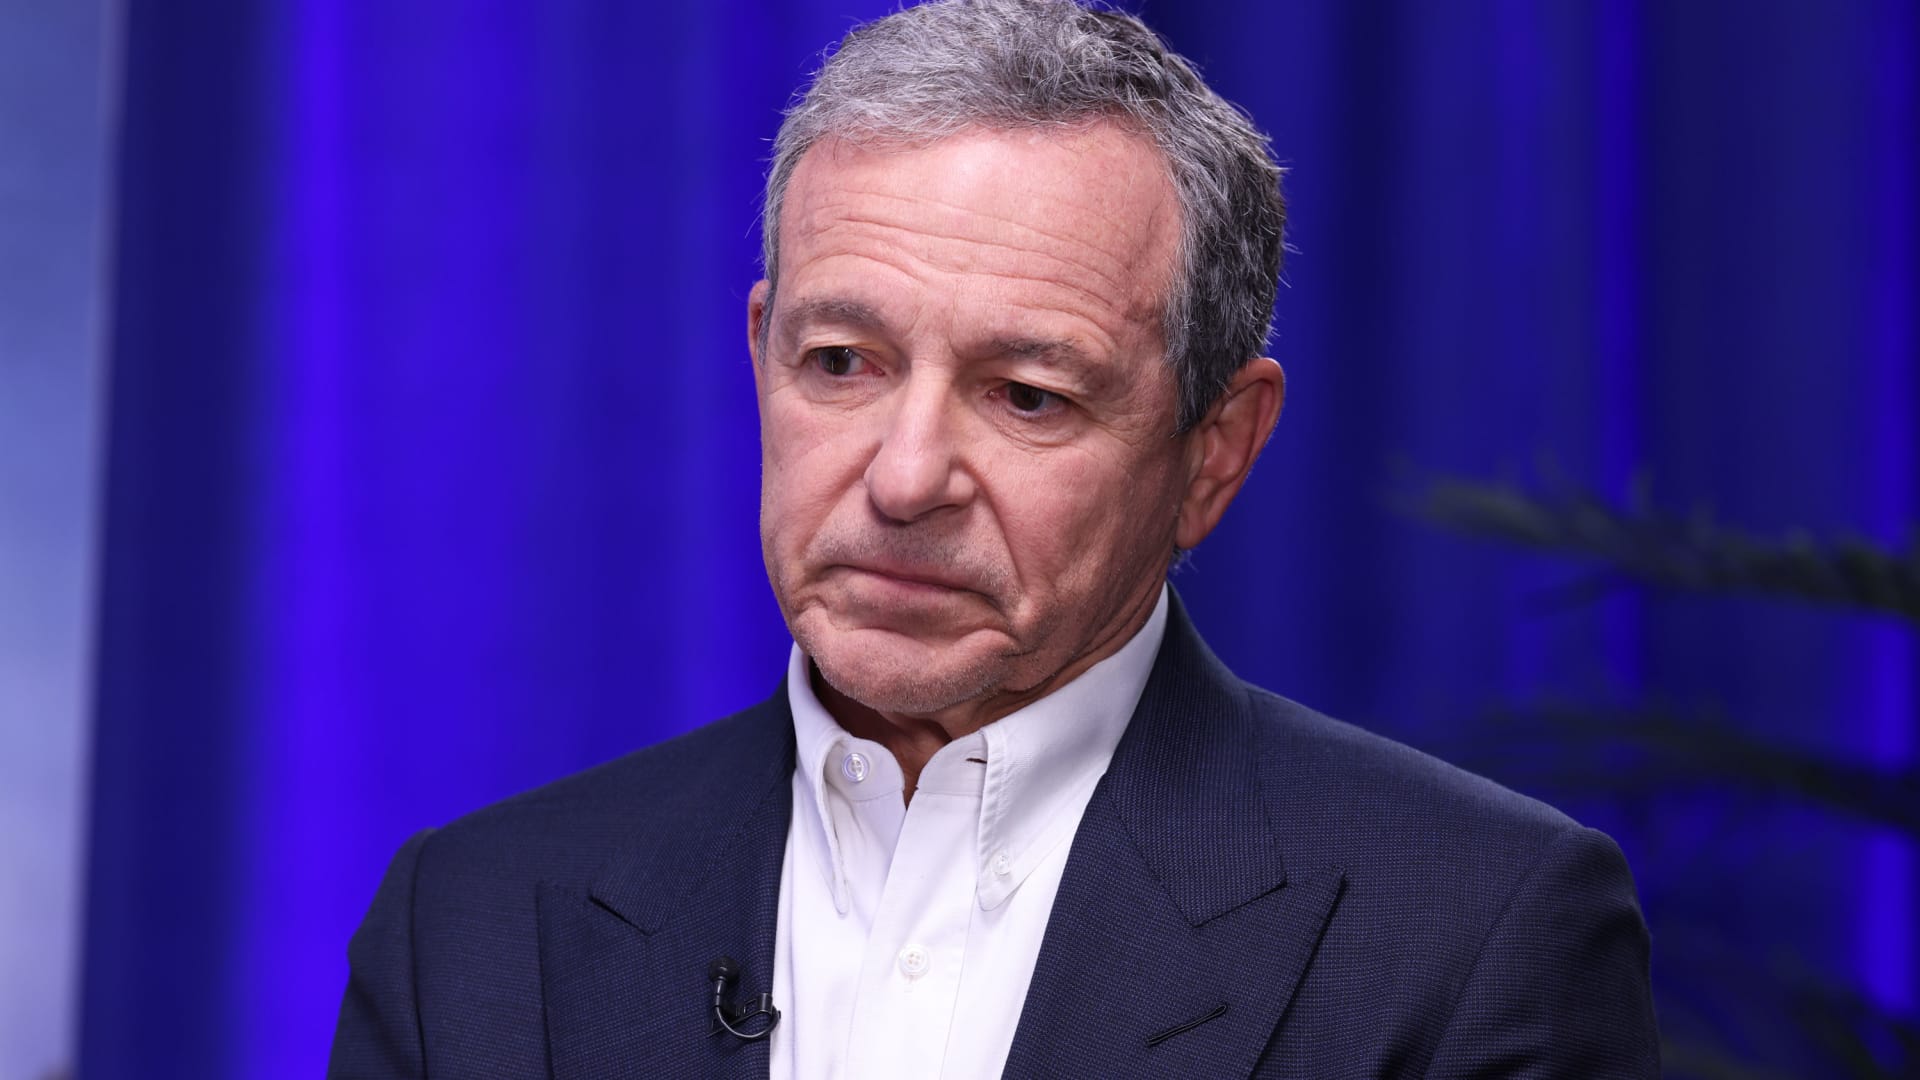 Disney layoffs will begin this week, CEO Bob Iger says in memo